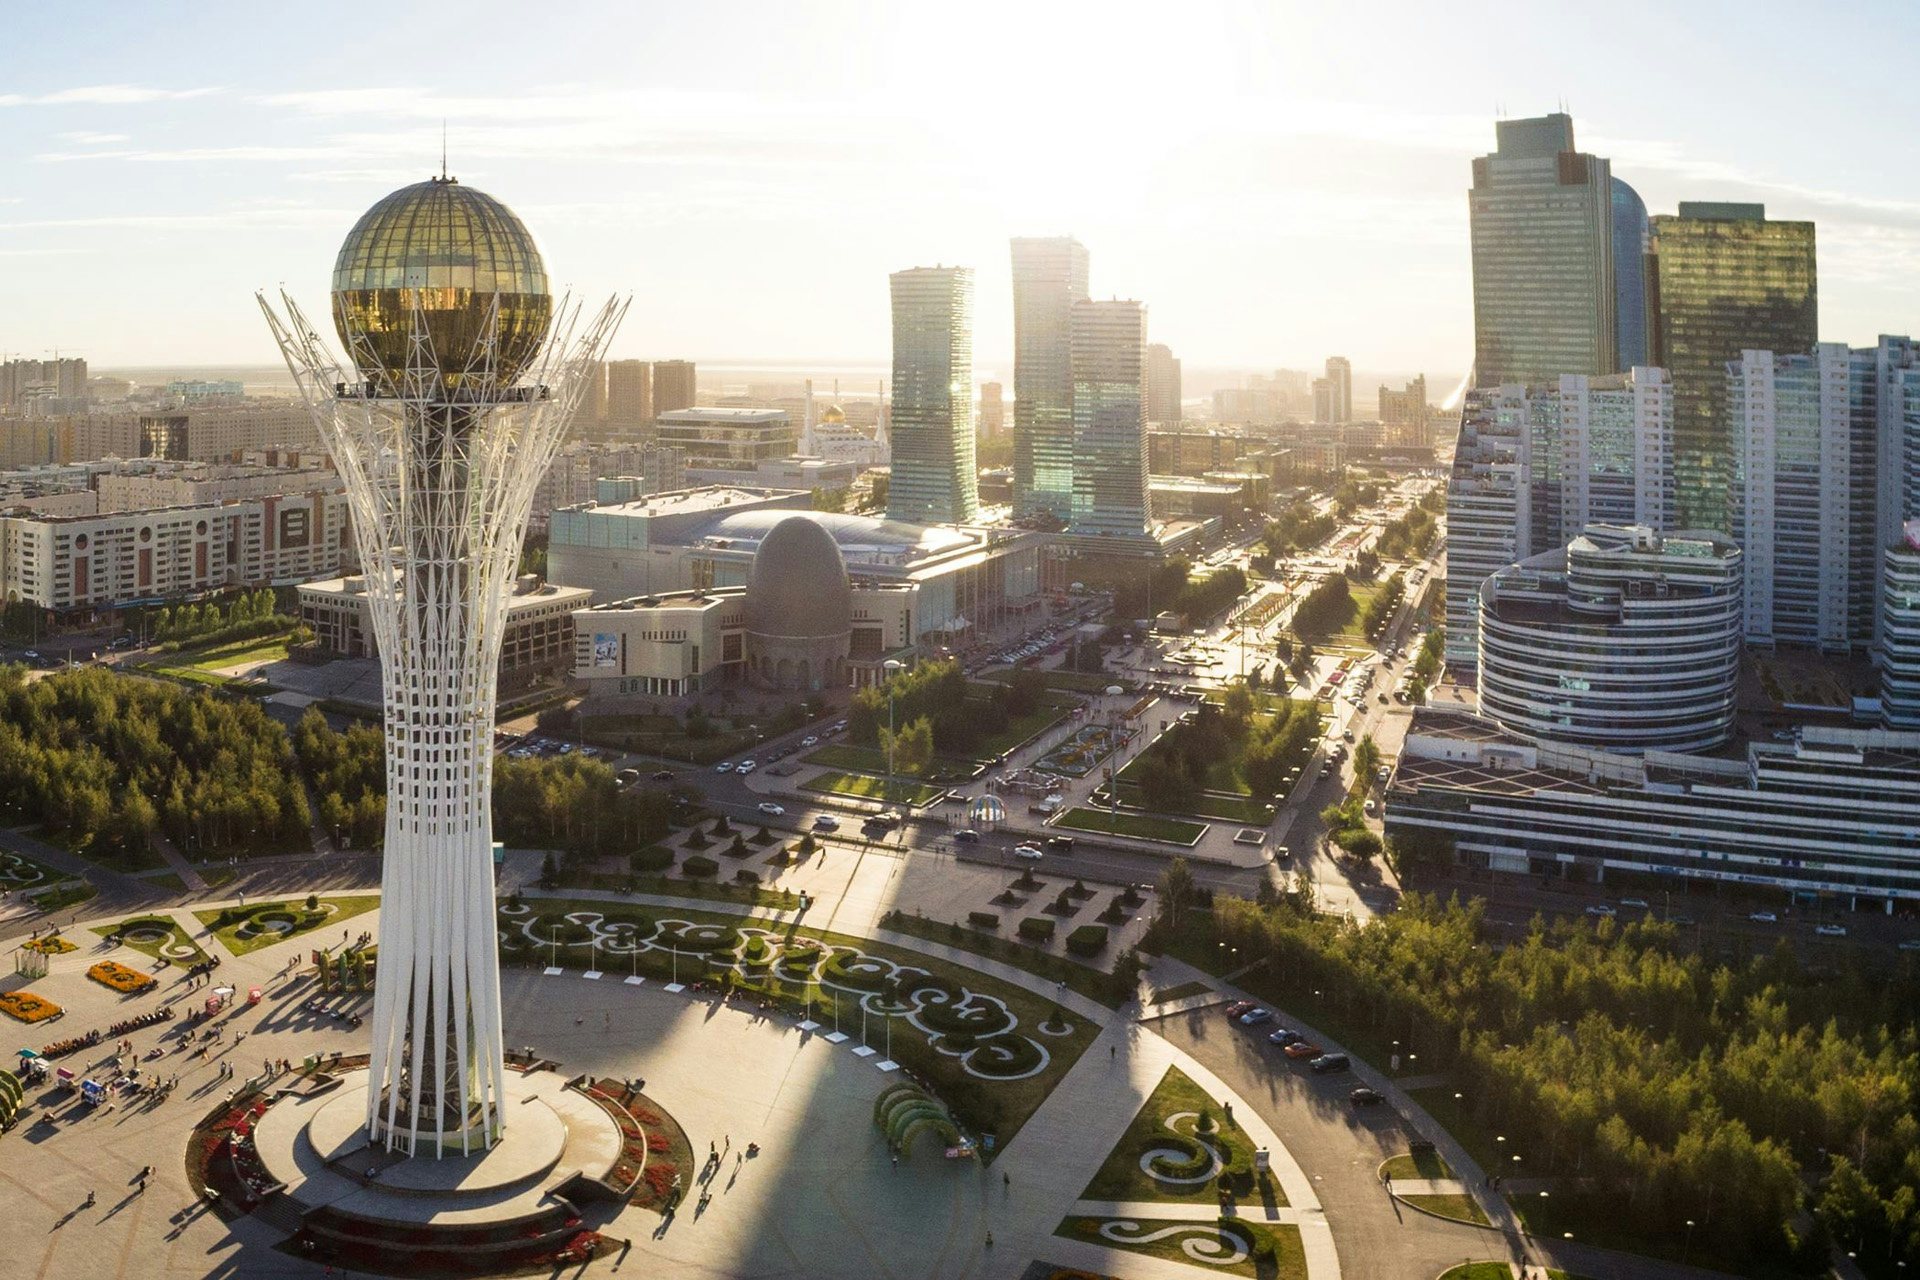 Astana, the capital of Kazakhstan, has seen new openings of international luxury hotels in the past year in anticipation of growing numbers of Chinese arrivals. Photo: Shutterstock